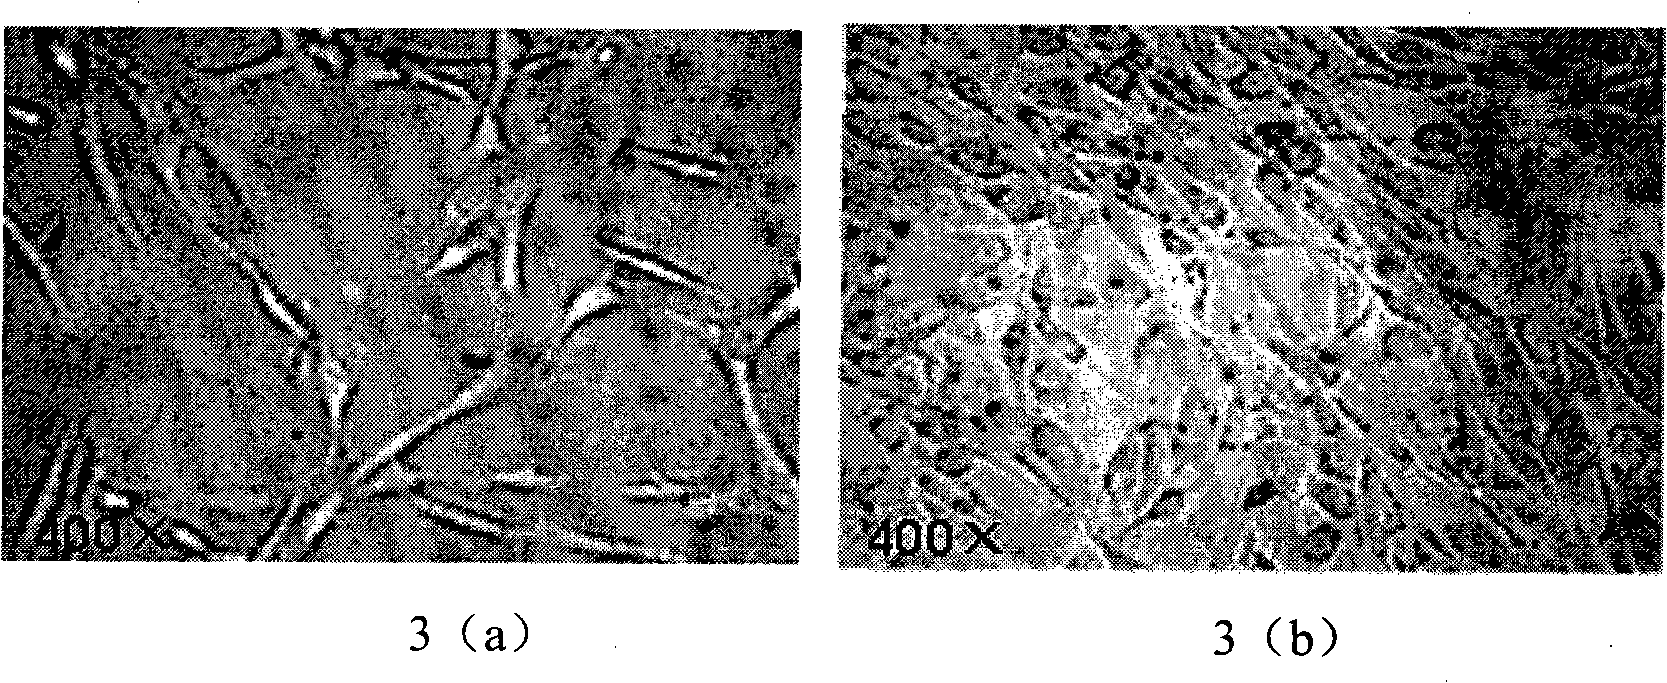 Acetobacter xylinum and method for preparing nano-cellulose skin tissue repair material by using the same